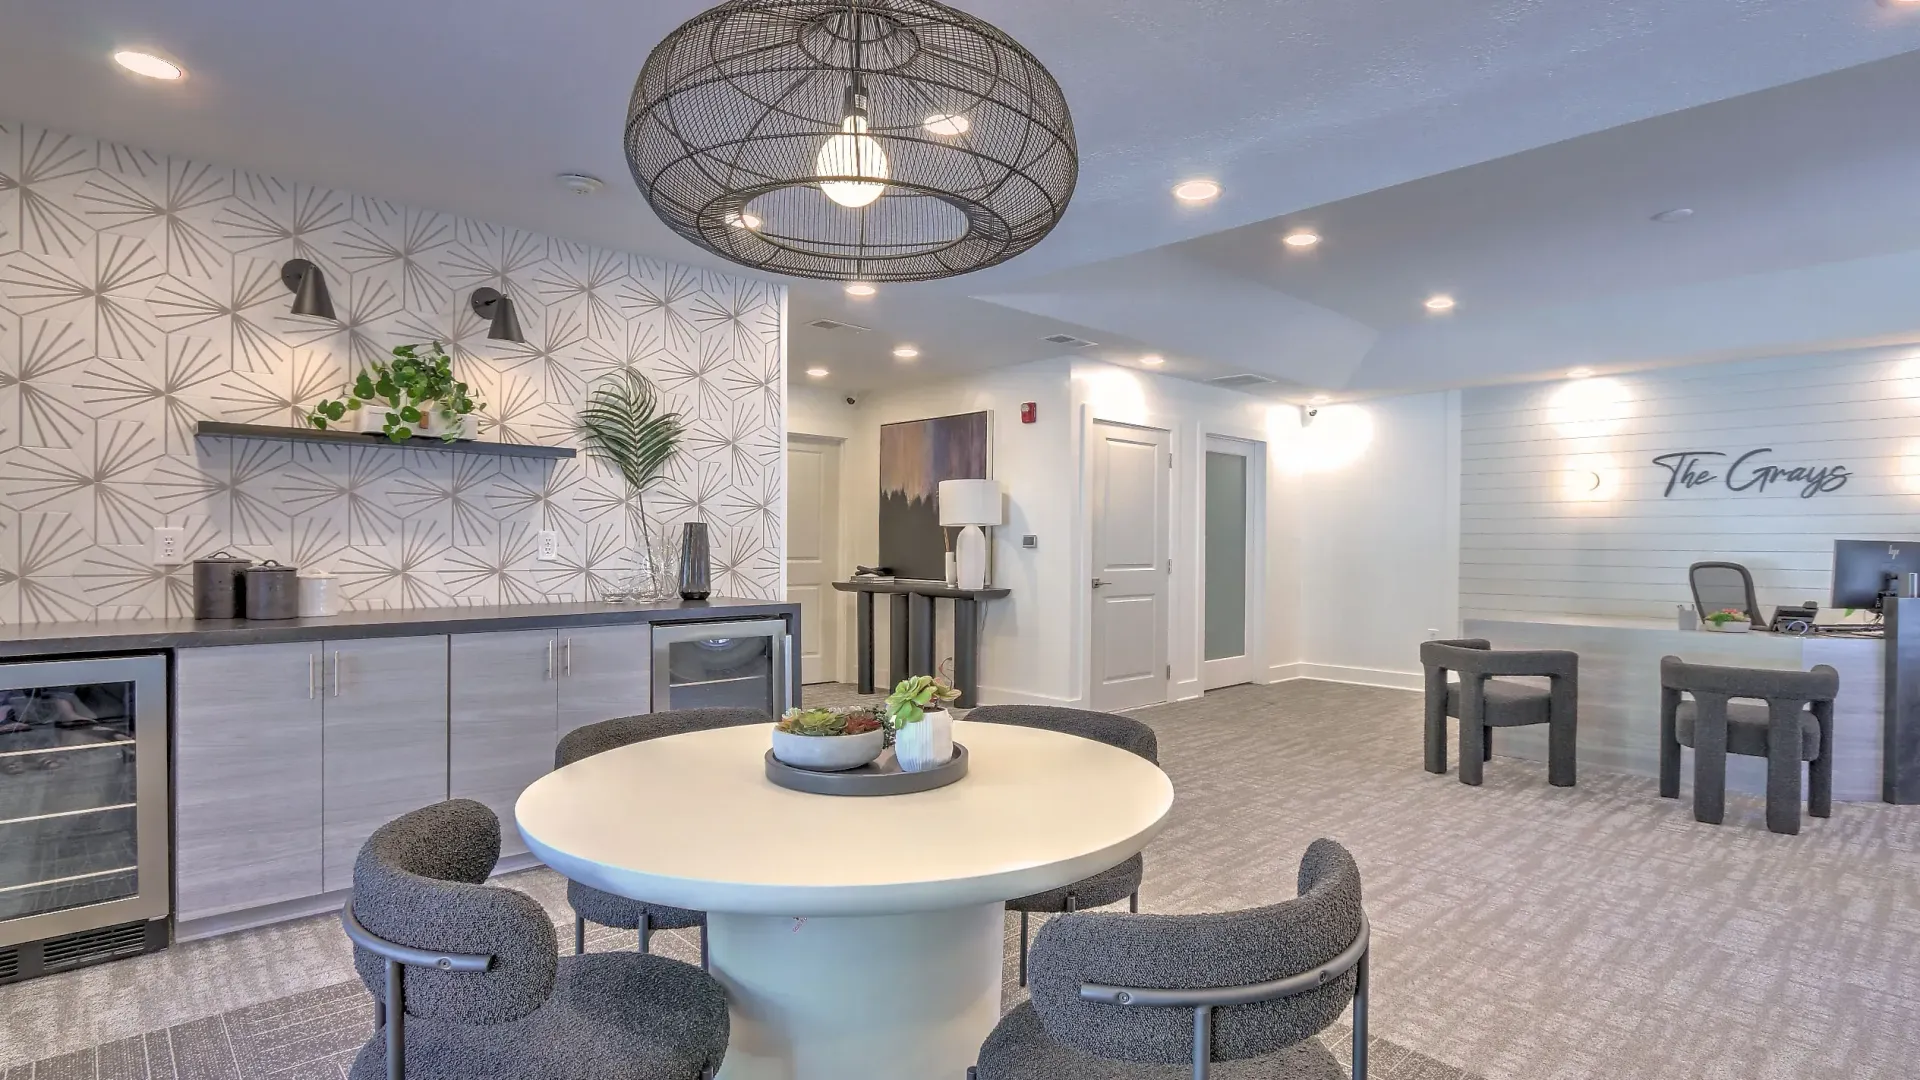 Inviting leasing center with a refreshment station and a quaint table setting perfect for chats with your property management extraordinaire.